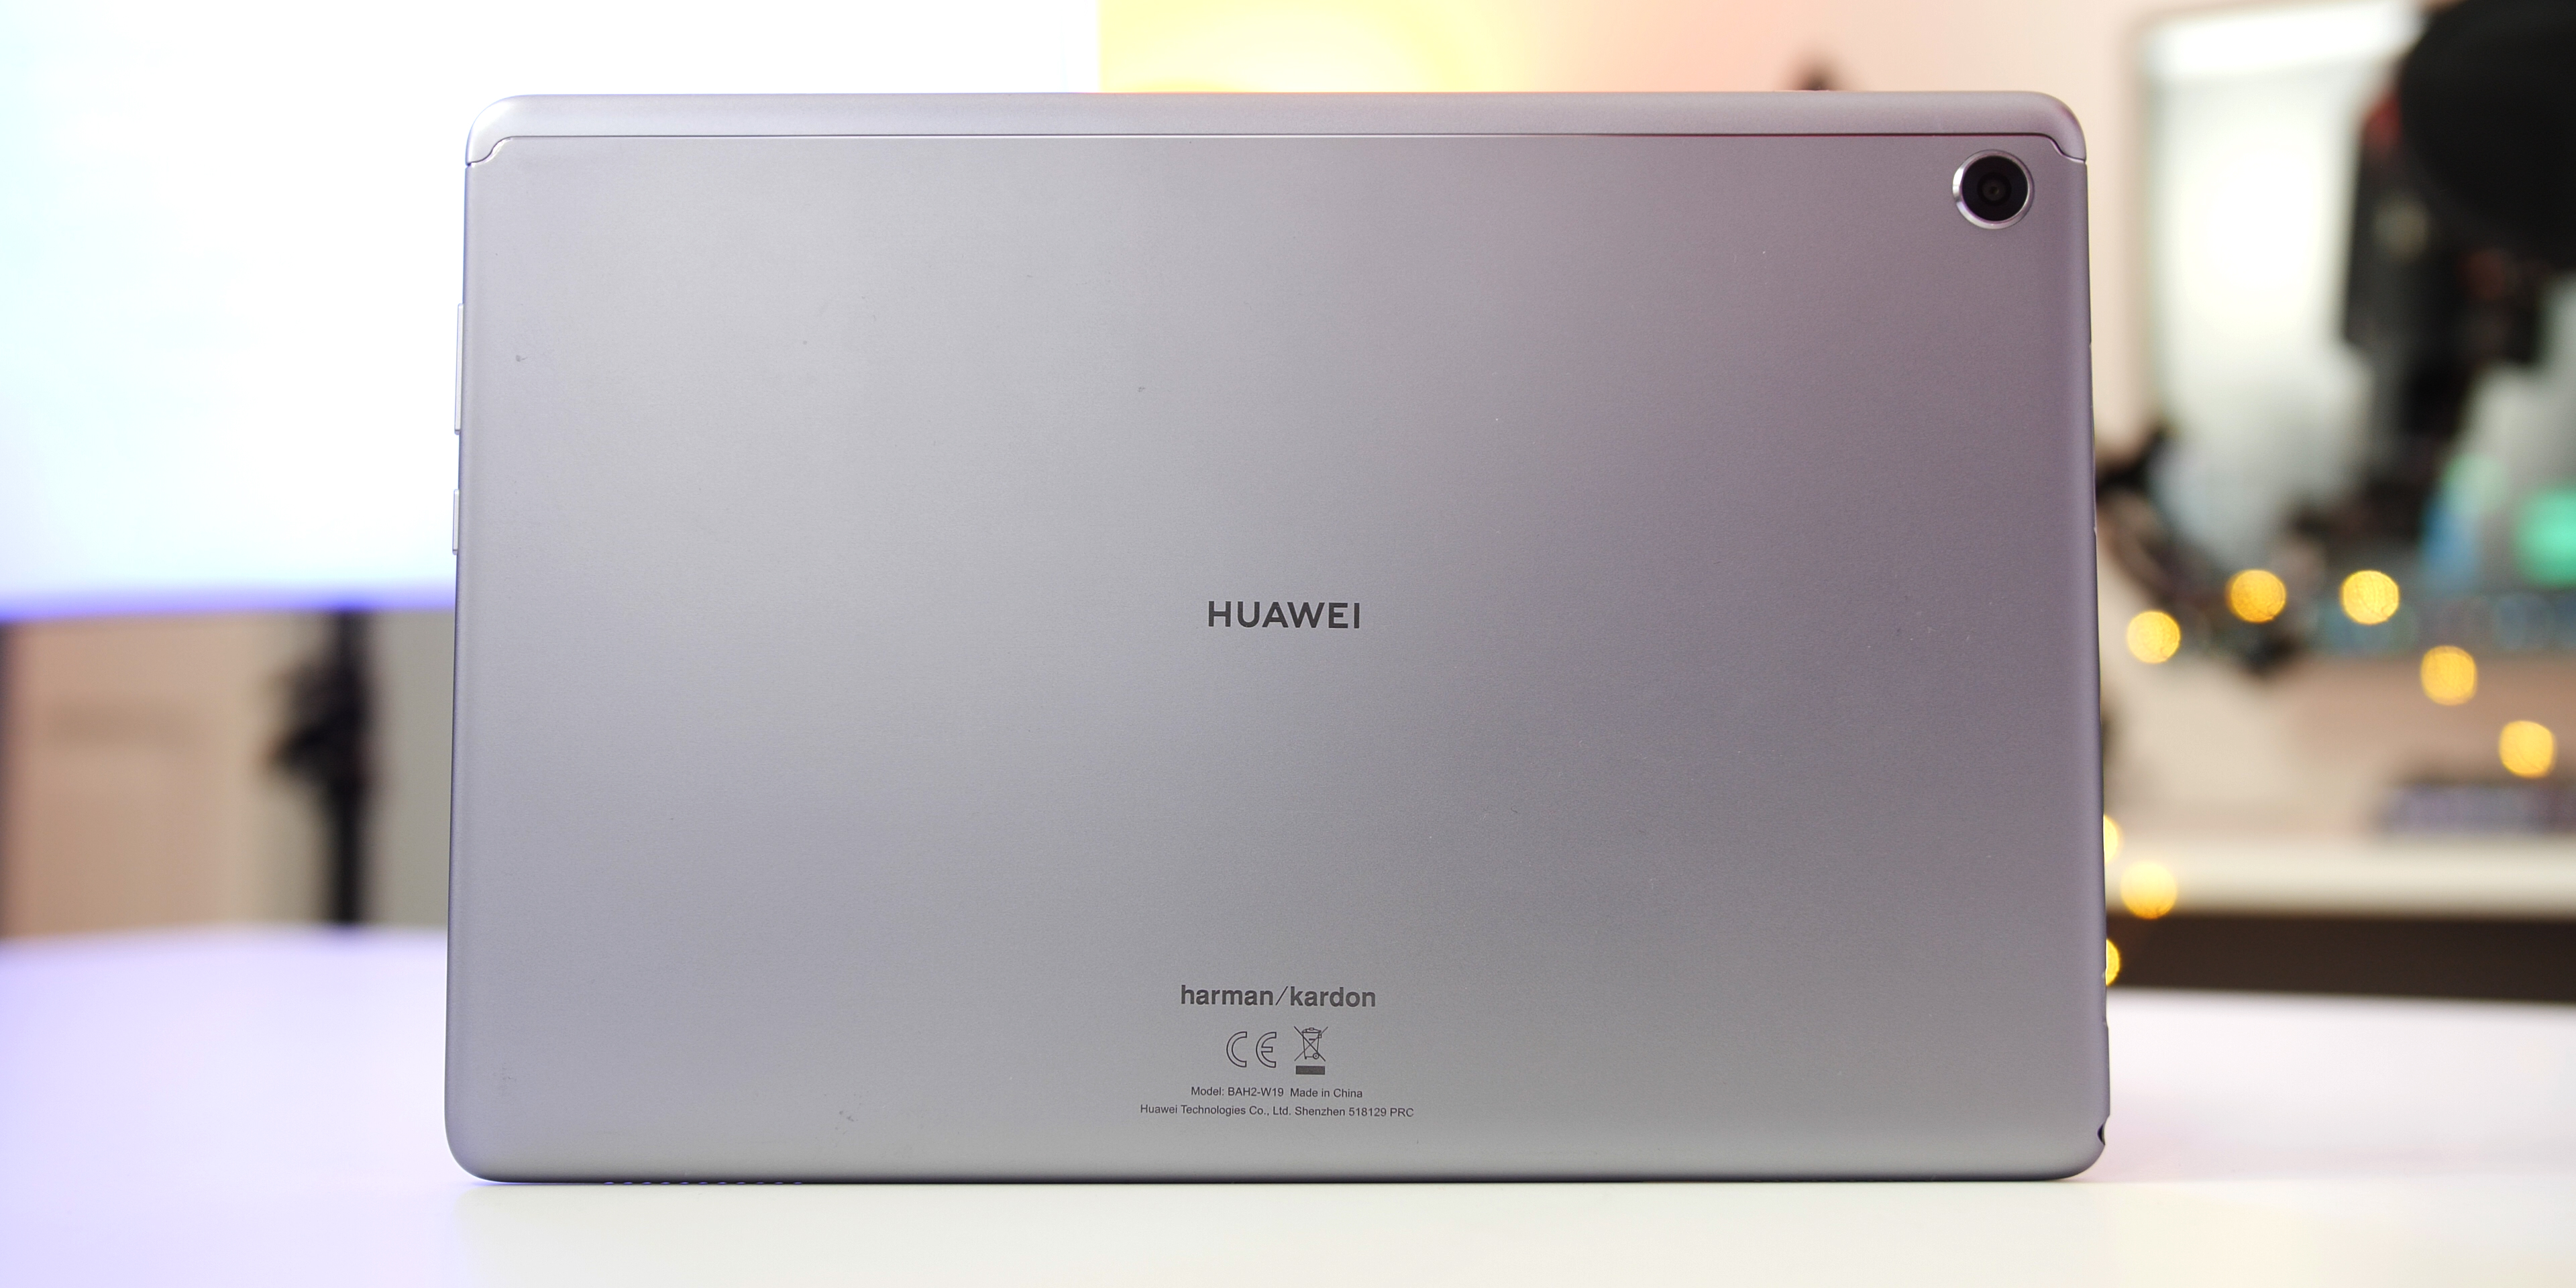 Huawei MediaPad M5 Lite review: A decent Android tablet - 9to5Google